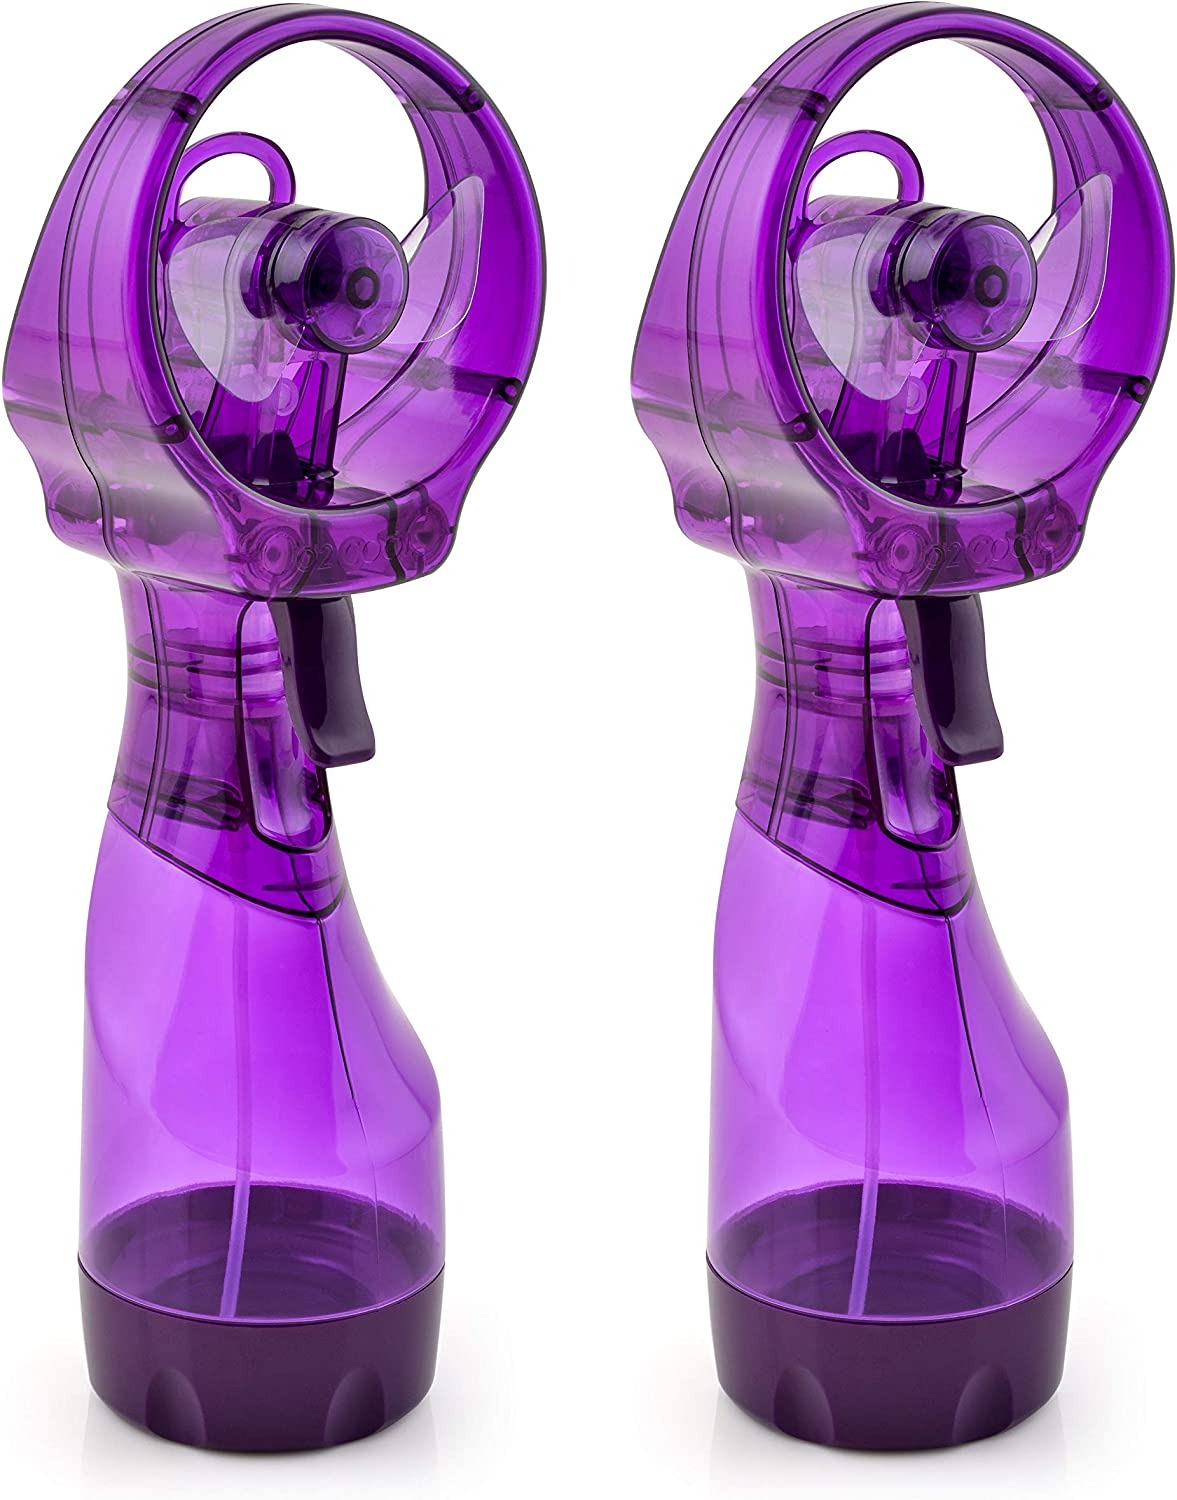 O2COOL Deluxe Handheld Battery Powered Water Misting Fan - 2 Adet - Purple-0